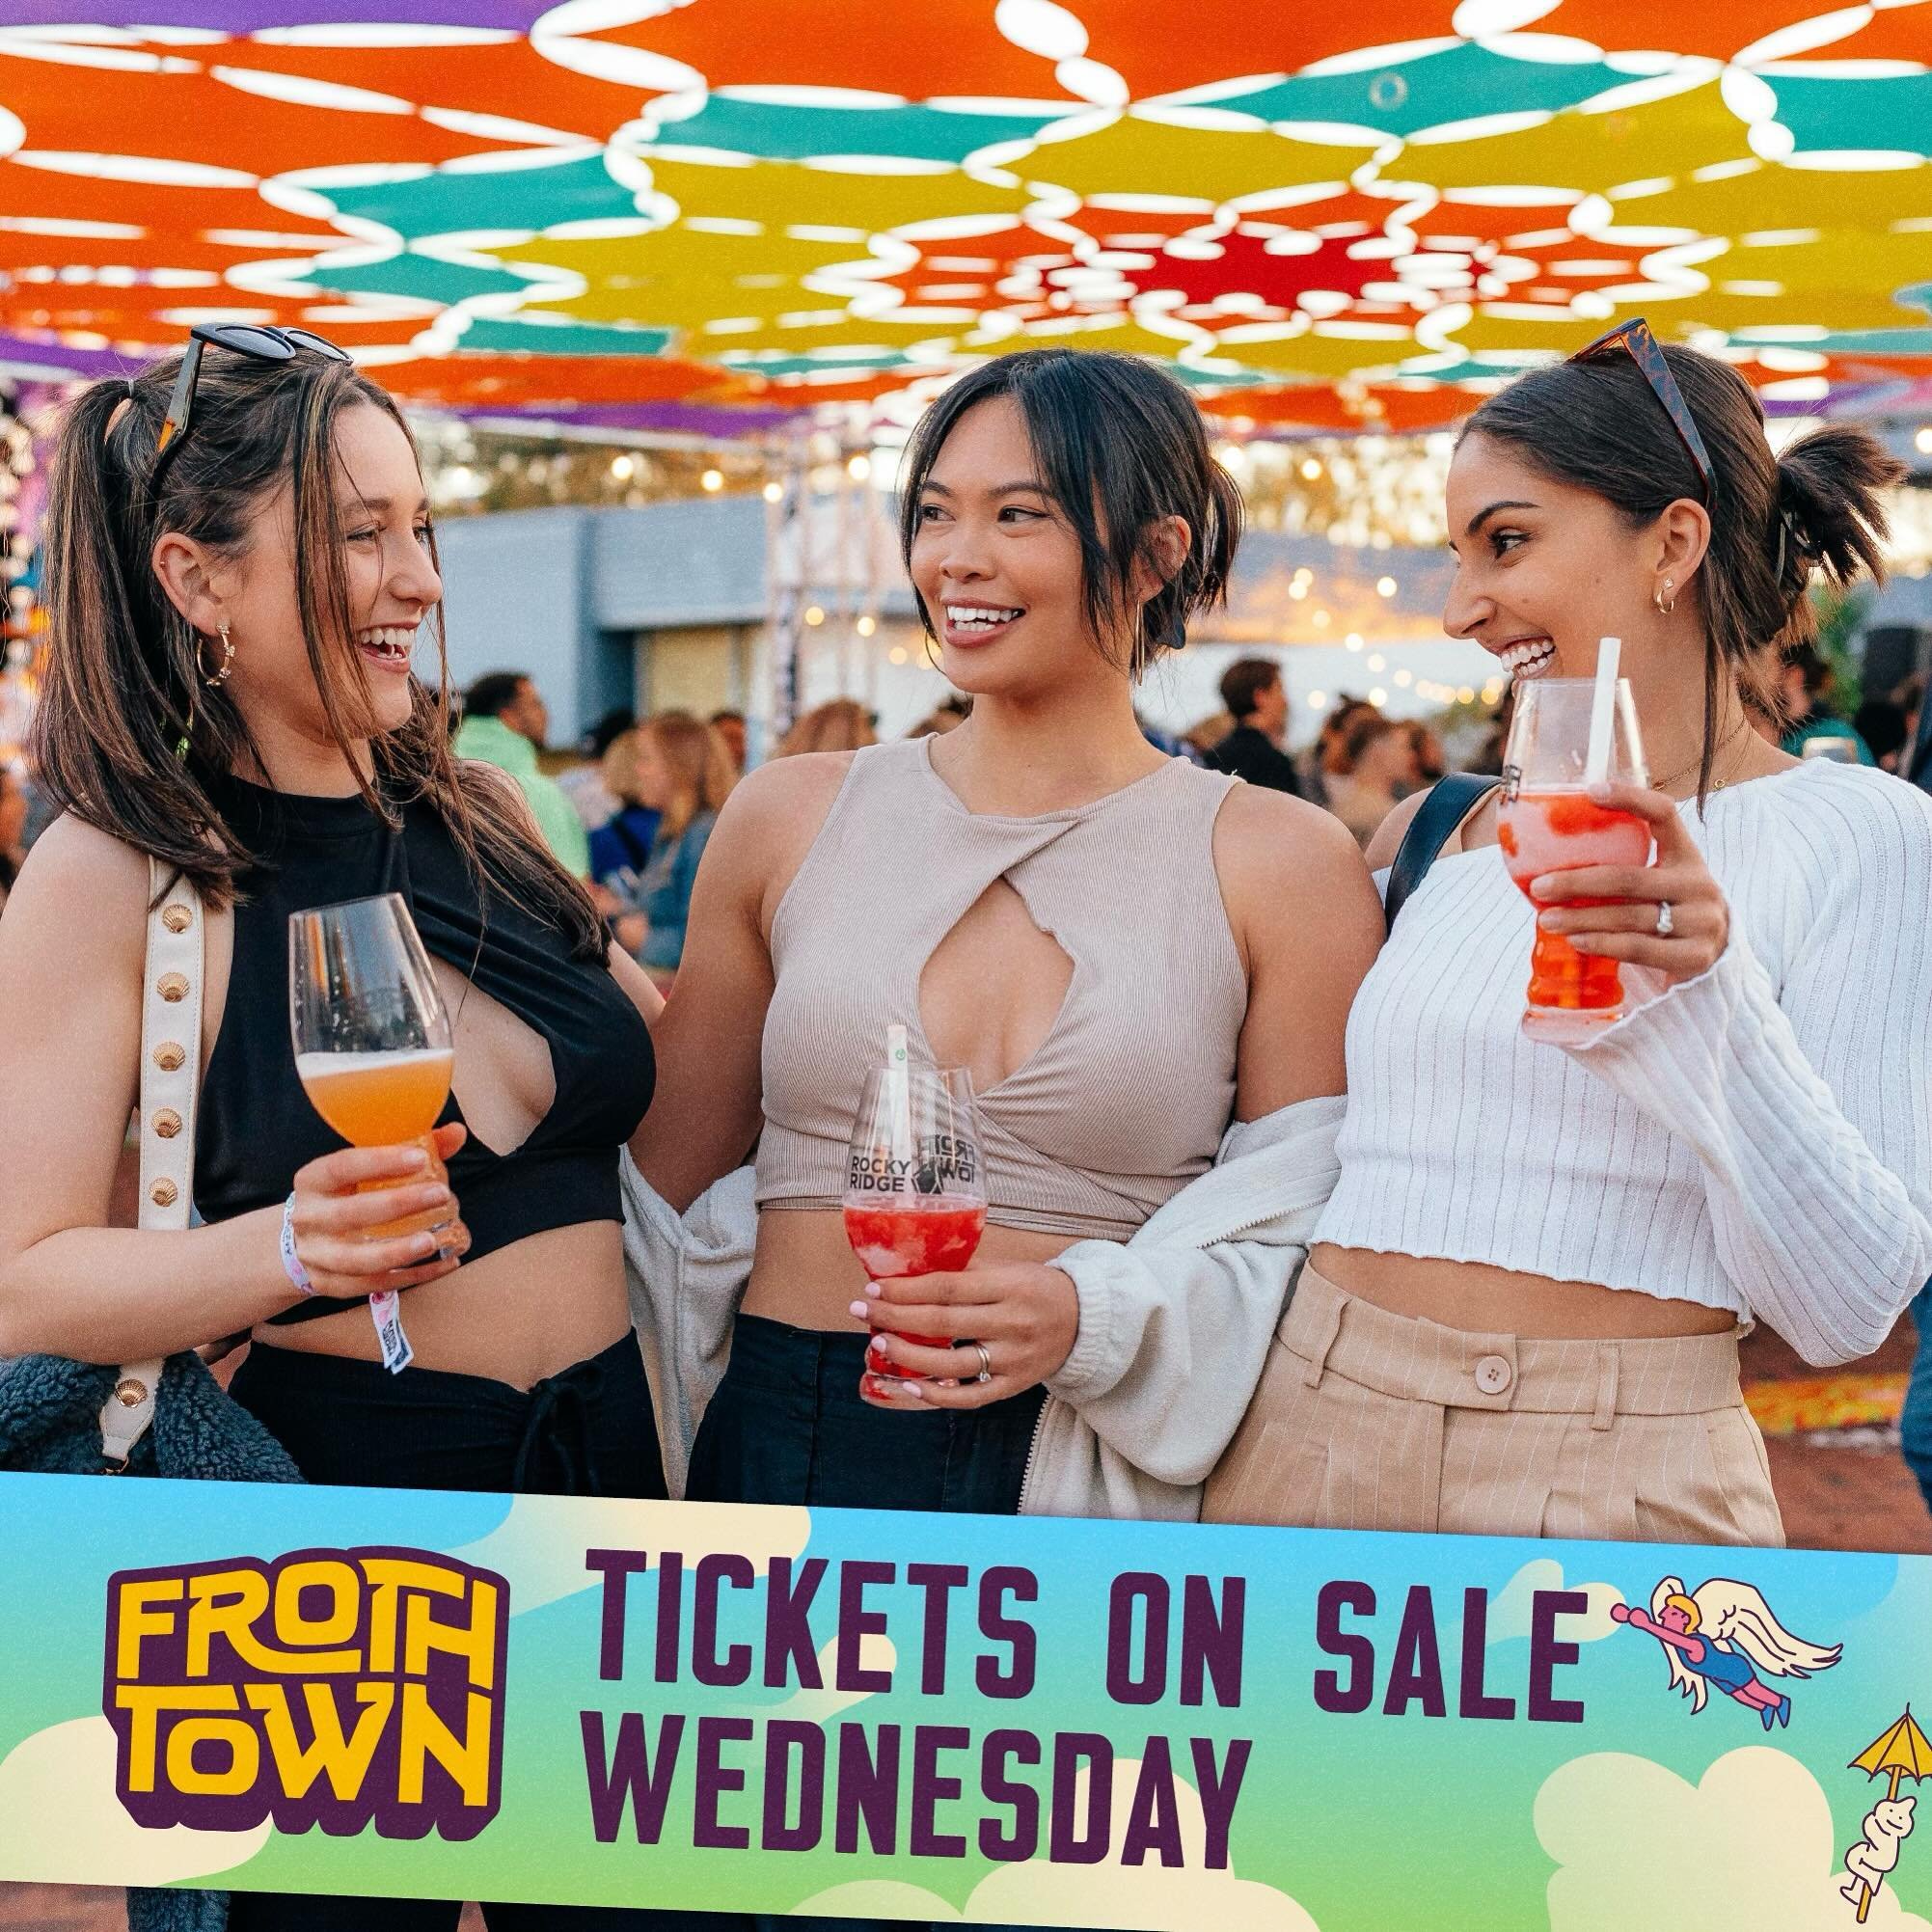 🚨TICKETS ON SALE THIS WEDNESDAY
Get the gang together &amp; prepare for a weekend overflowing with frothy fun, hoppy adventures, and unforgettable memories 🤸&zwj;♀️

⏰ Starting 9:00am THIS WEDNESDAY, APRIL 17, secure your Froth Town tickets from as